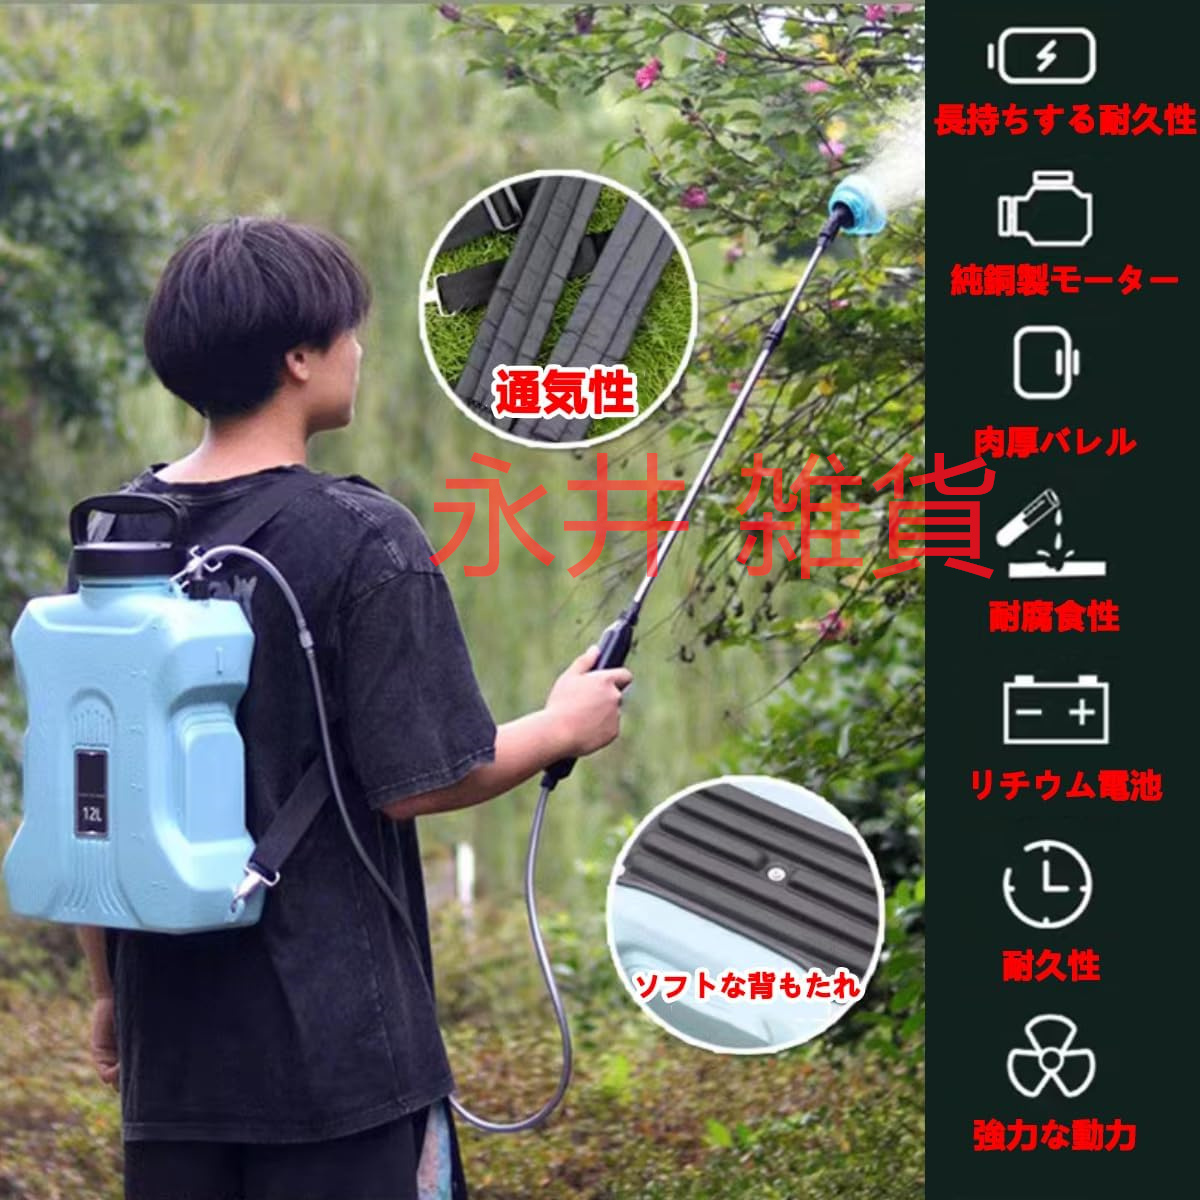 1 jpy electric sprayer 12L set rechargeable sprayer automatic sprayer 2500mah battery built-in . extermination of harmful insects pesticide disinfection weeding fertilizer . water pressure power adjustment possible car wash 